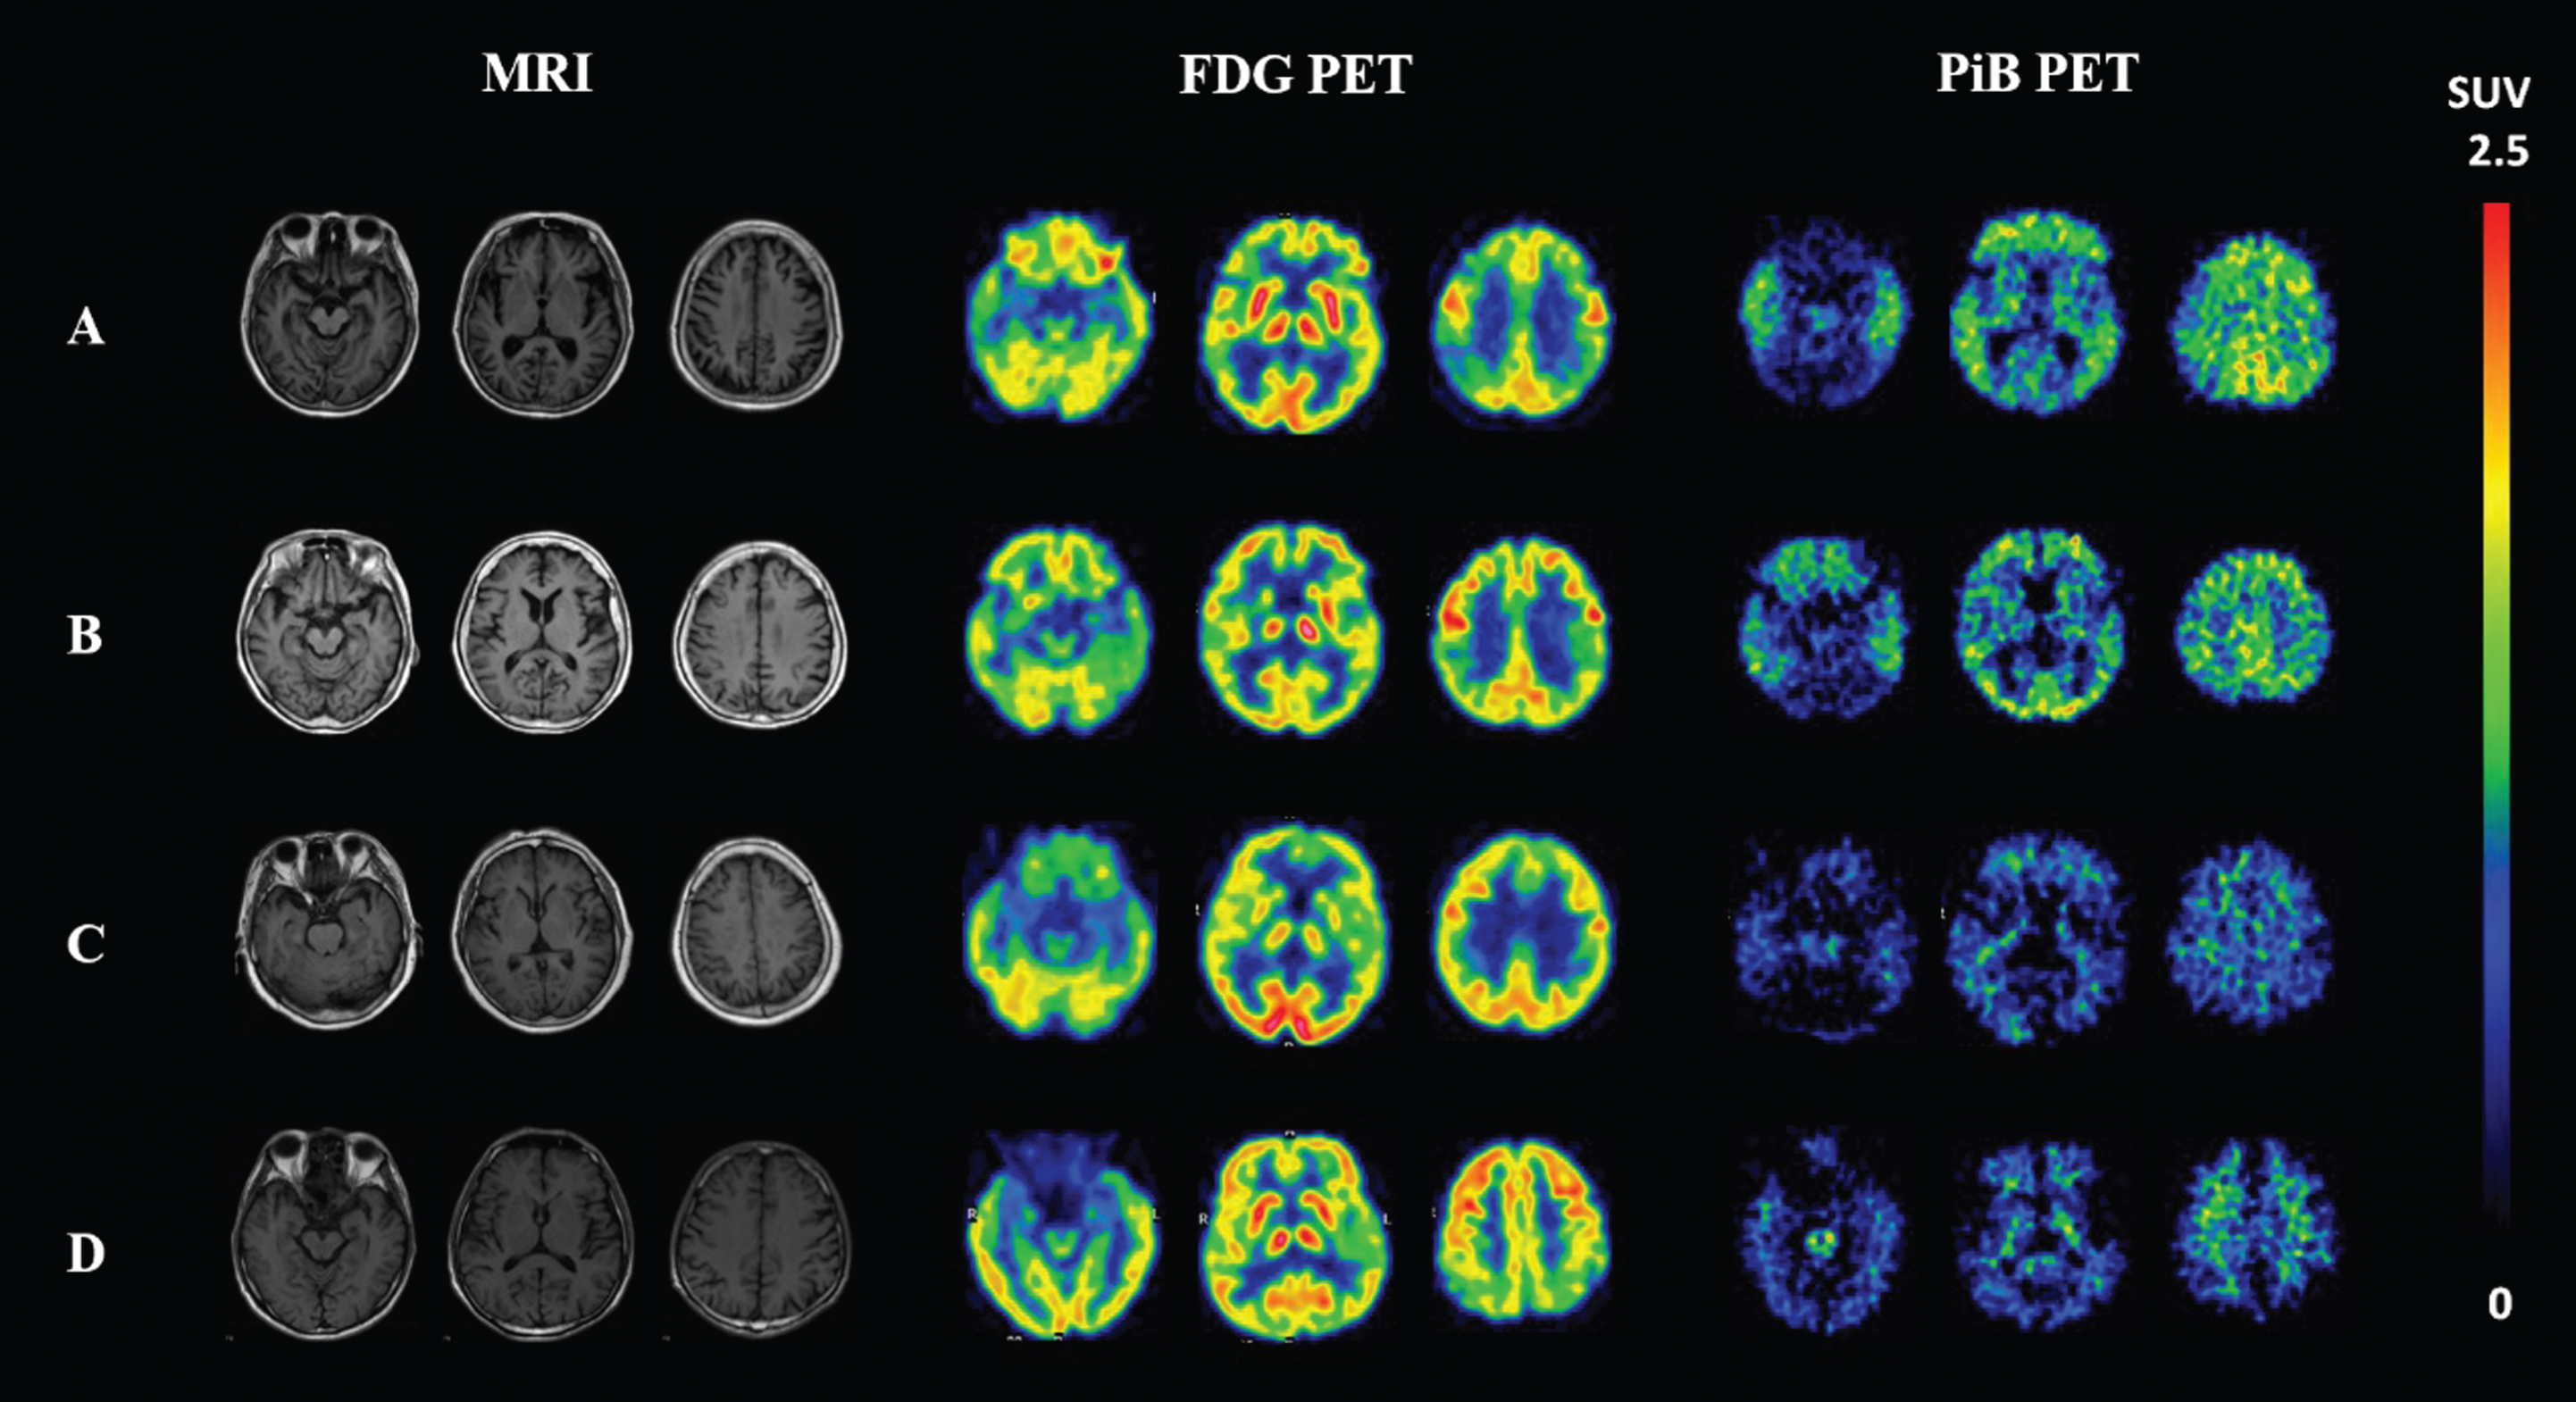 T1-weighted MRI, FDG-PET and PiB-PET images of four representative participants. A 64-year-old female AD patient with positive Aβ deposition on PiB-PET and “AD” type of hypometabolism on FDG-PET (A); a 76-year-old female MCI subject with positive Aβ deposition on PiB-PET and “AD” type of hypometabolism on FDG-PET (B); a 78-year-old female AD patient with negative PiB and “FTD” type of hypometabolism (C); and a 71-year-old male AD patient with negative PiB and non-specific hypometabolism on FDG-PET (D). FDG, fluorodeoxyglucose; PiB, Pittsburgh compound B; PET, positron emission tomography; AD, Alzheimer’s disease; MCI, mild cognitive impairment; FTD, frontotemporal dementia.